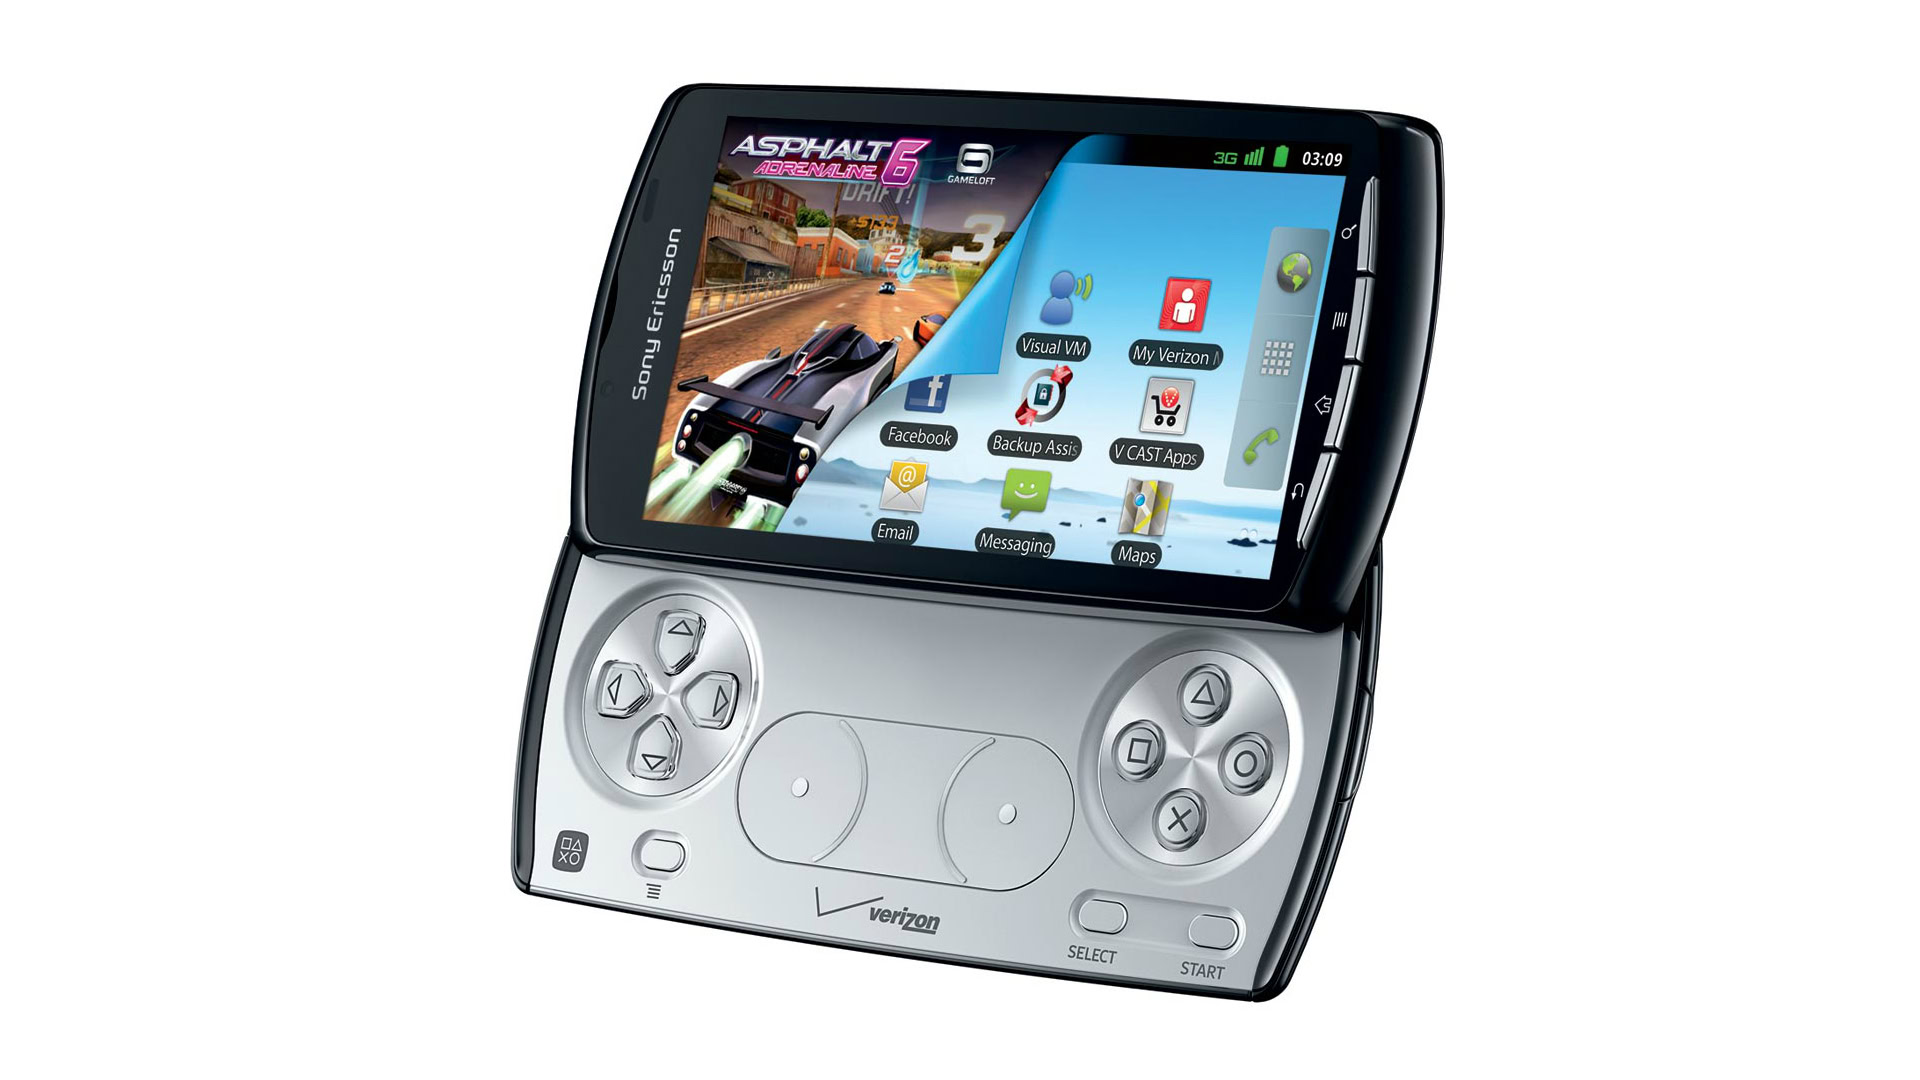 xperia play wallpapers hd